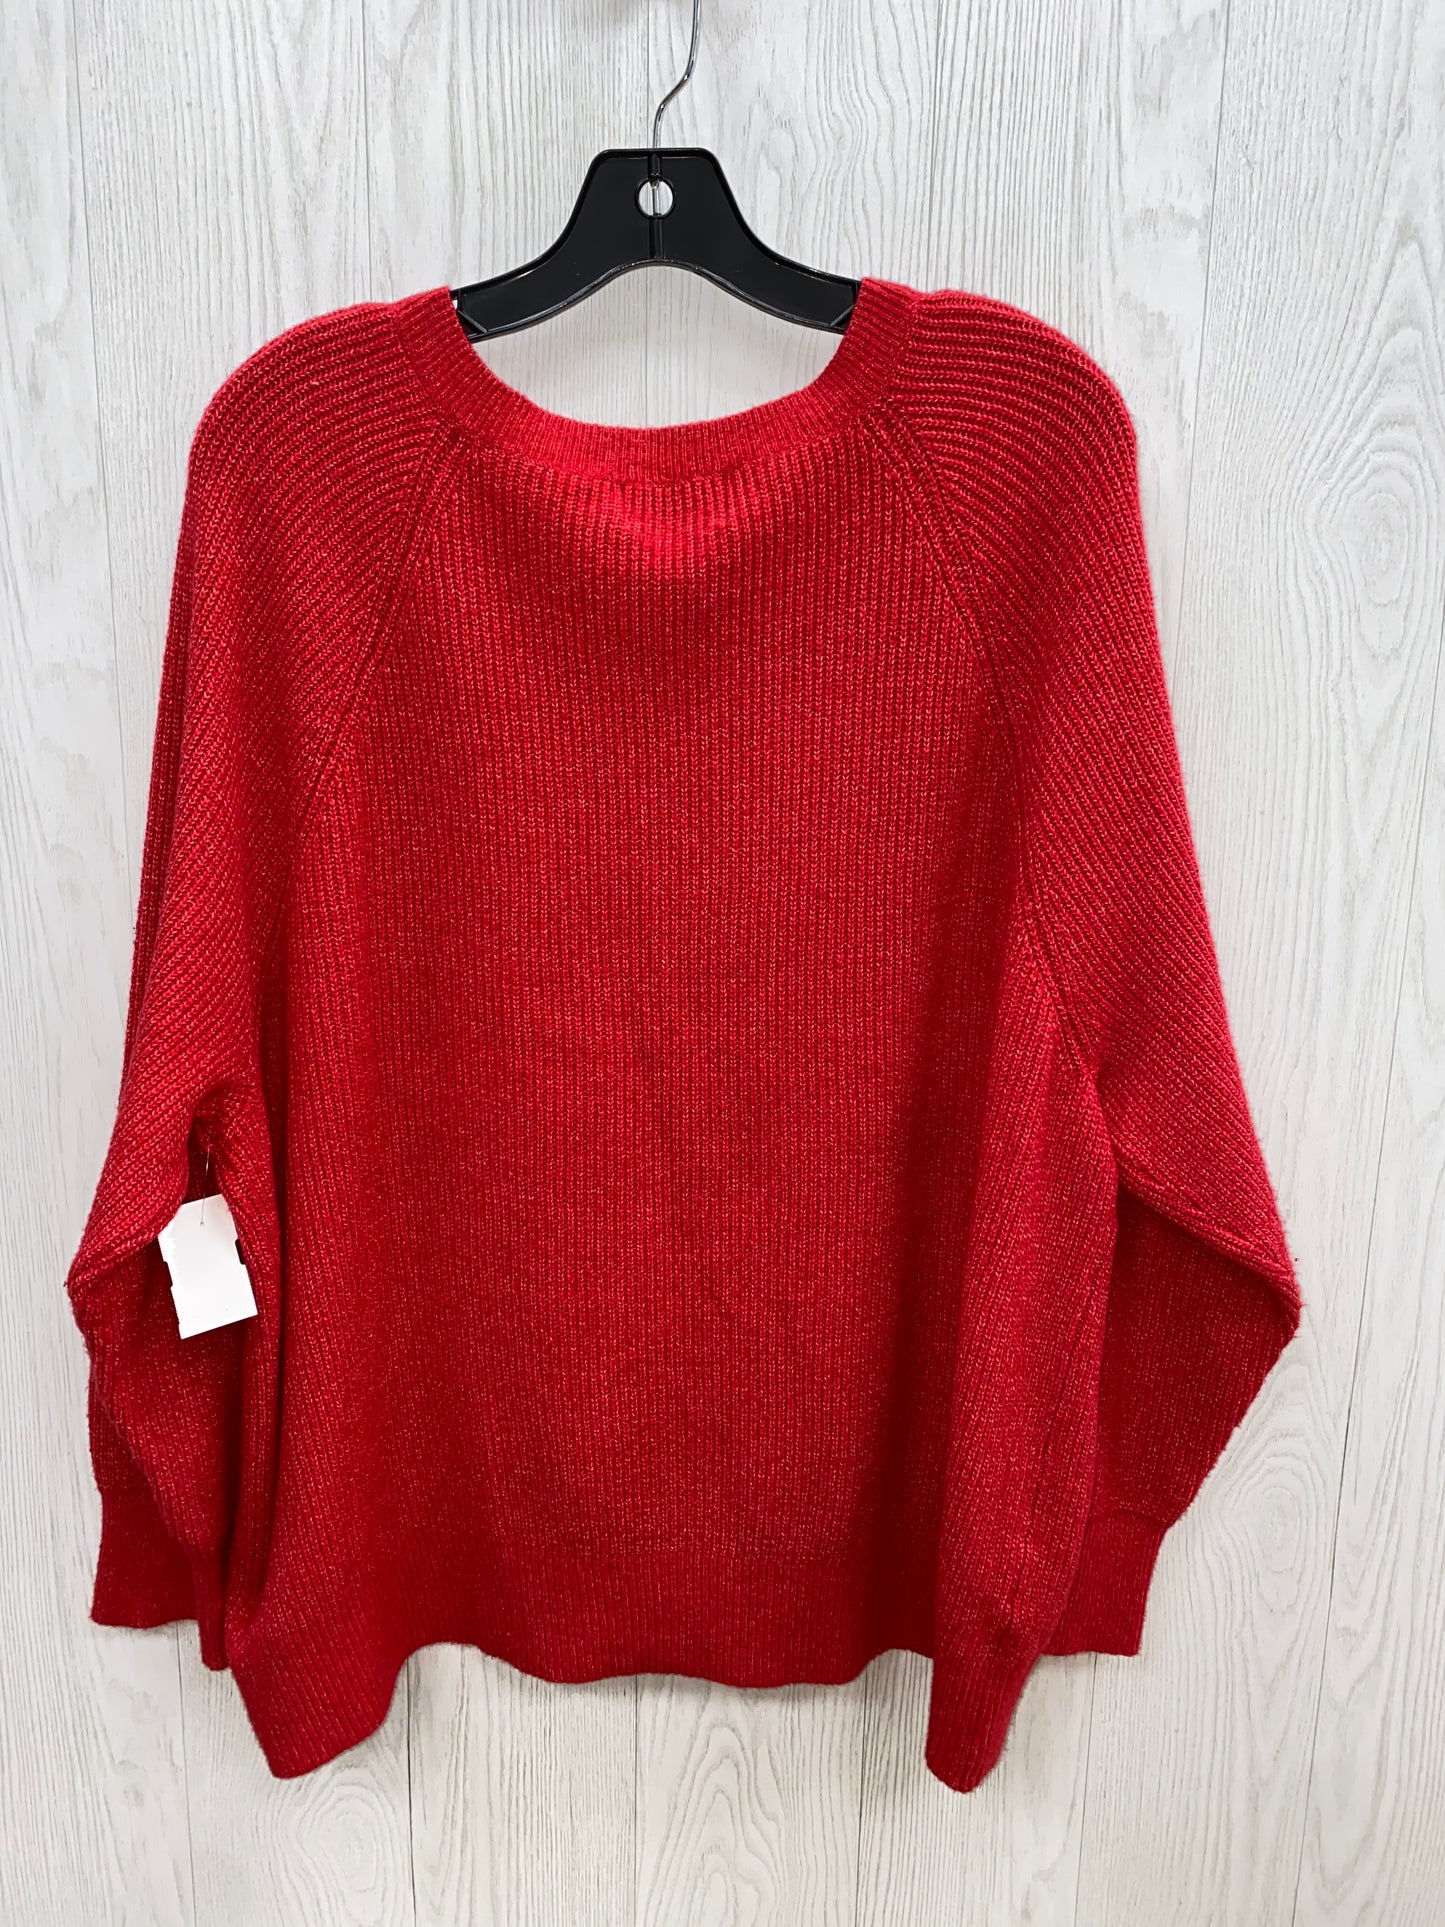 Sweater By Old Navy  Size: 2x